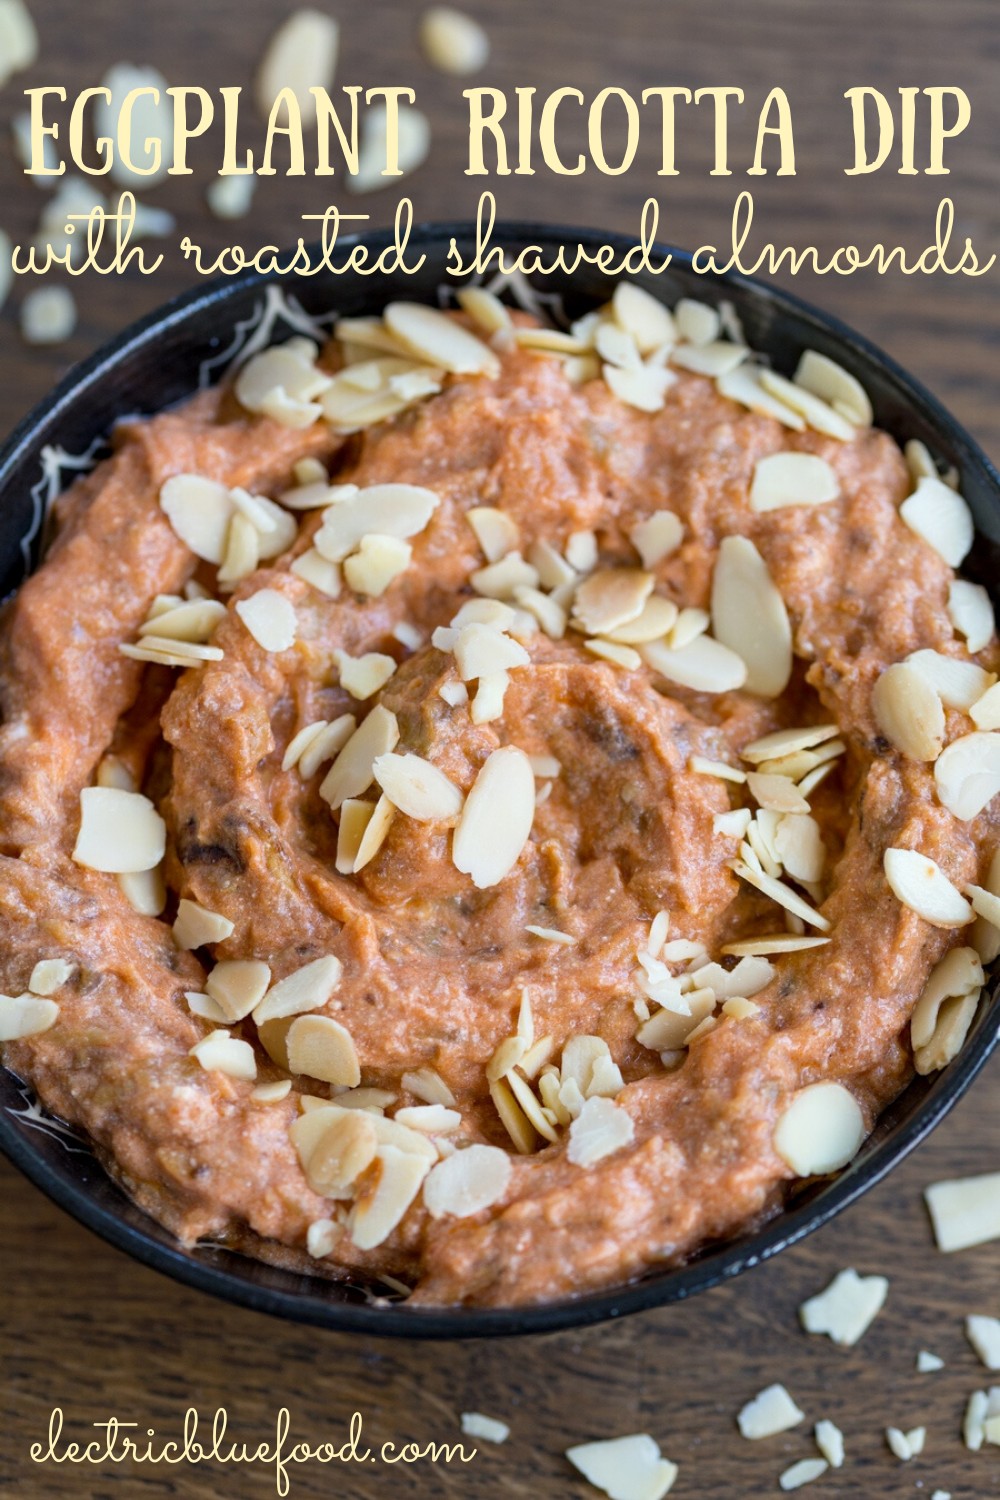 This creamy eggplant ricotta dip is perfect if you want a break from usual dips. Roasted eggplants, ricotta, tomato paste and chili oil give this eggplant dip a wonderful flavour. Top with roasted shaved almonds to achieve dip perfection!